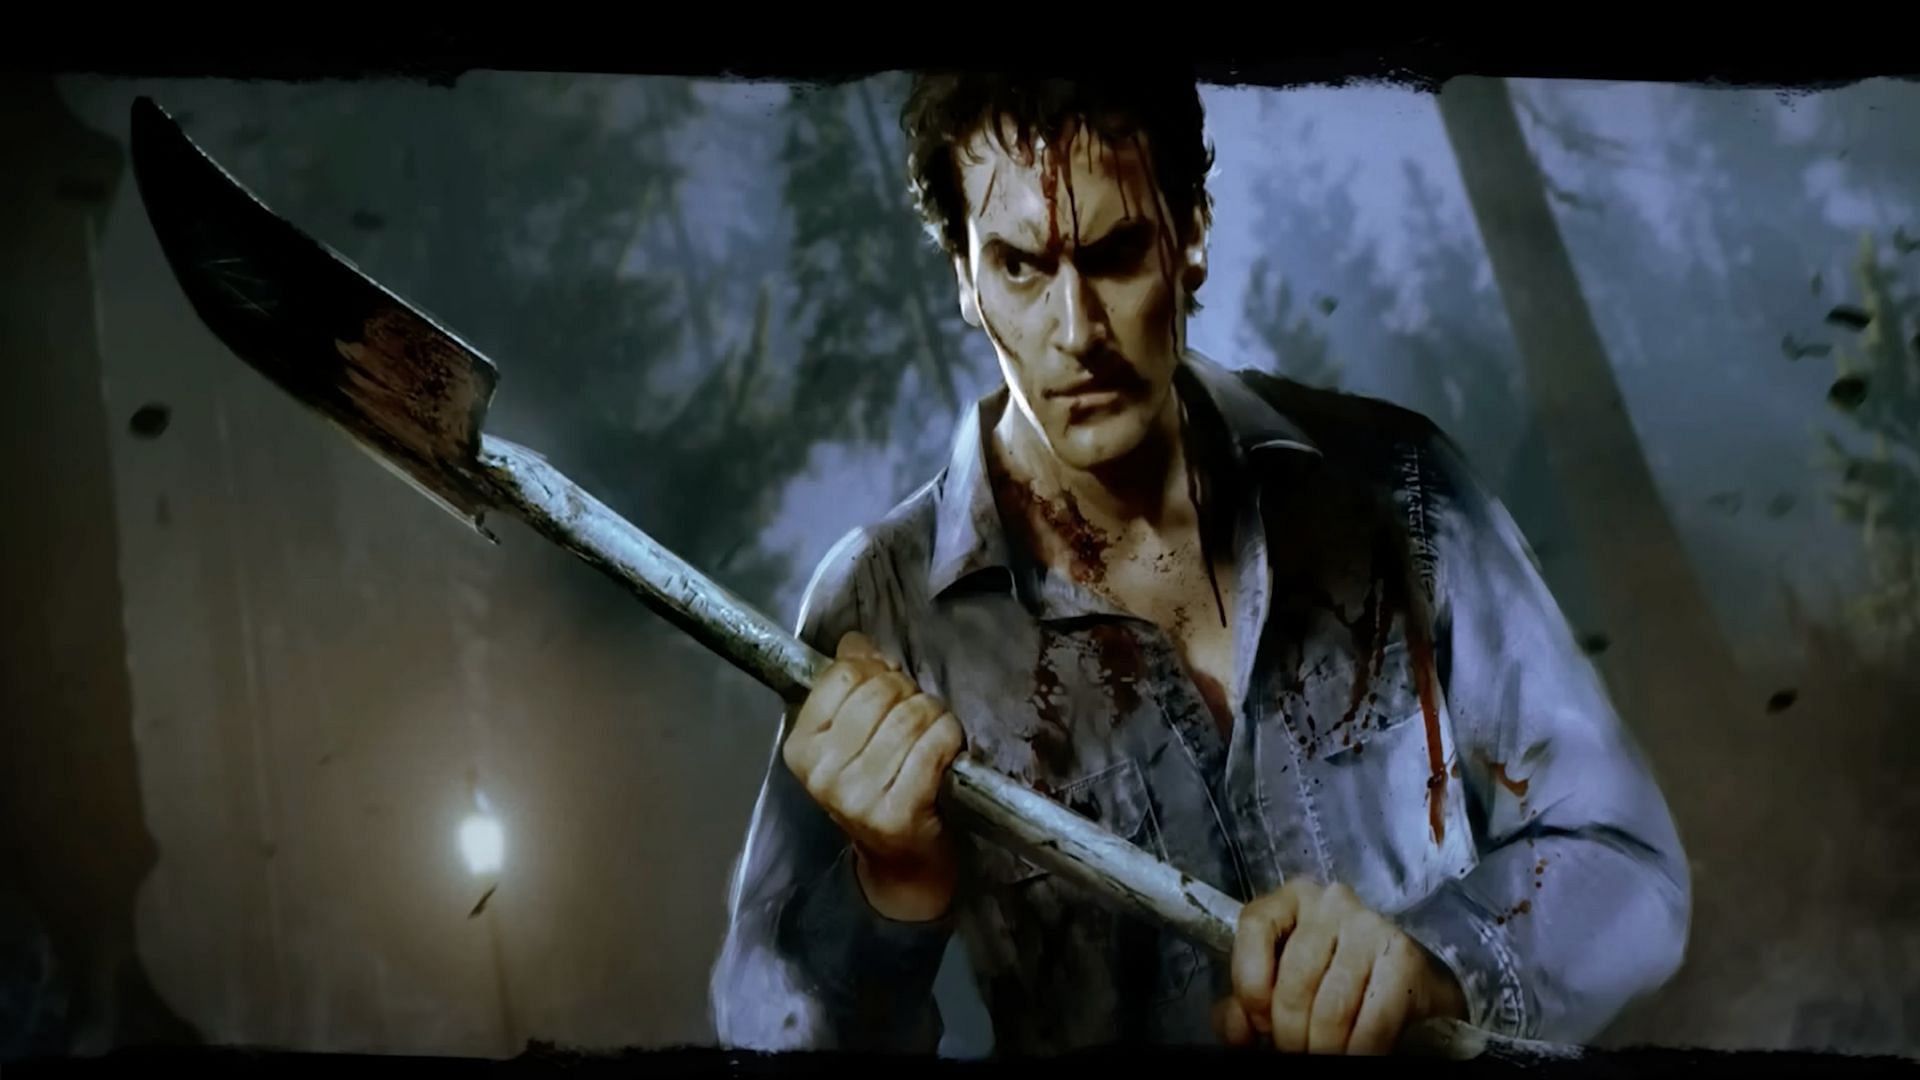 Players will need to keep their wits about them to complete this Evil Dead: The Game mission (Image via vash12349/YouTube)